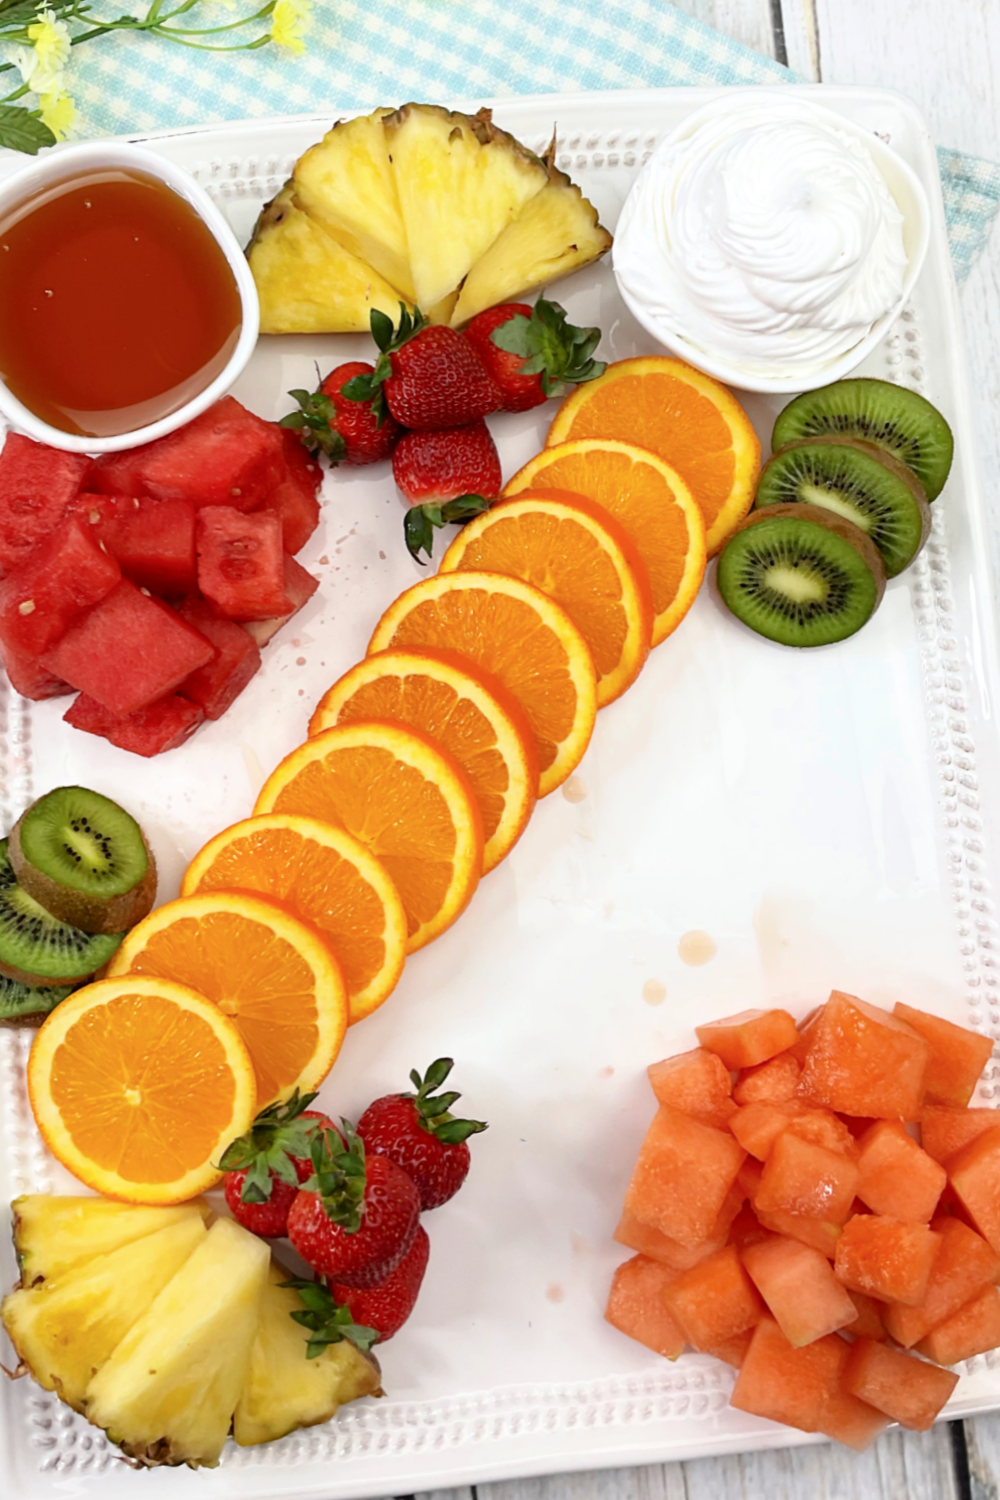 How to make a fruit platter or fruit charcuterie board.